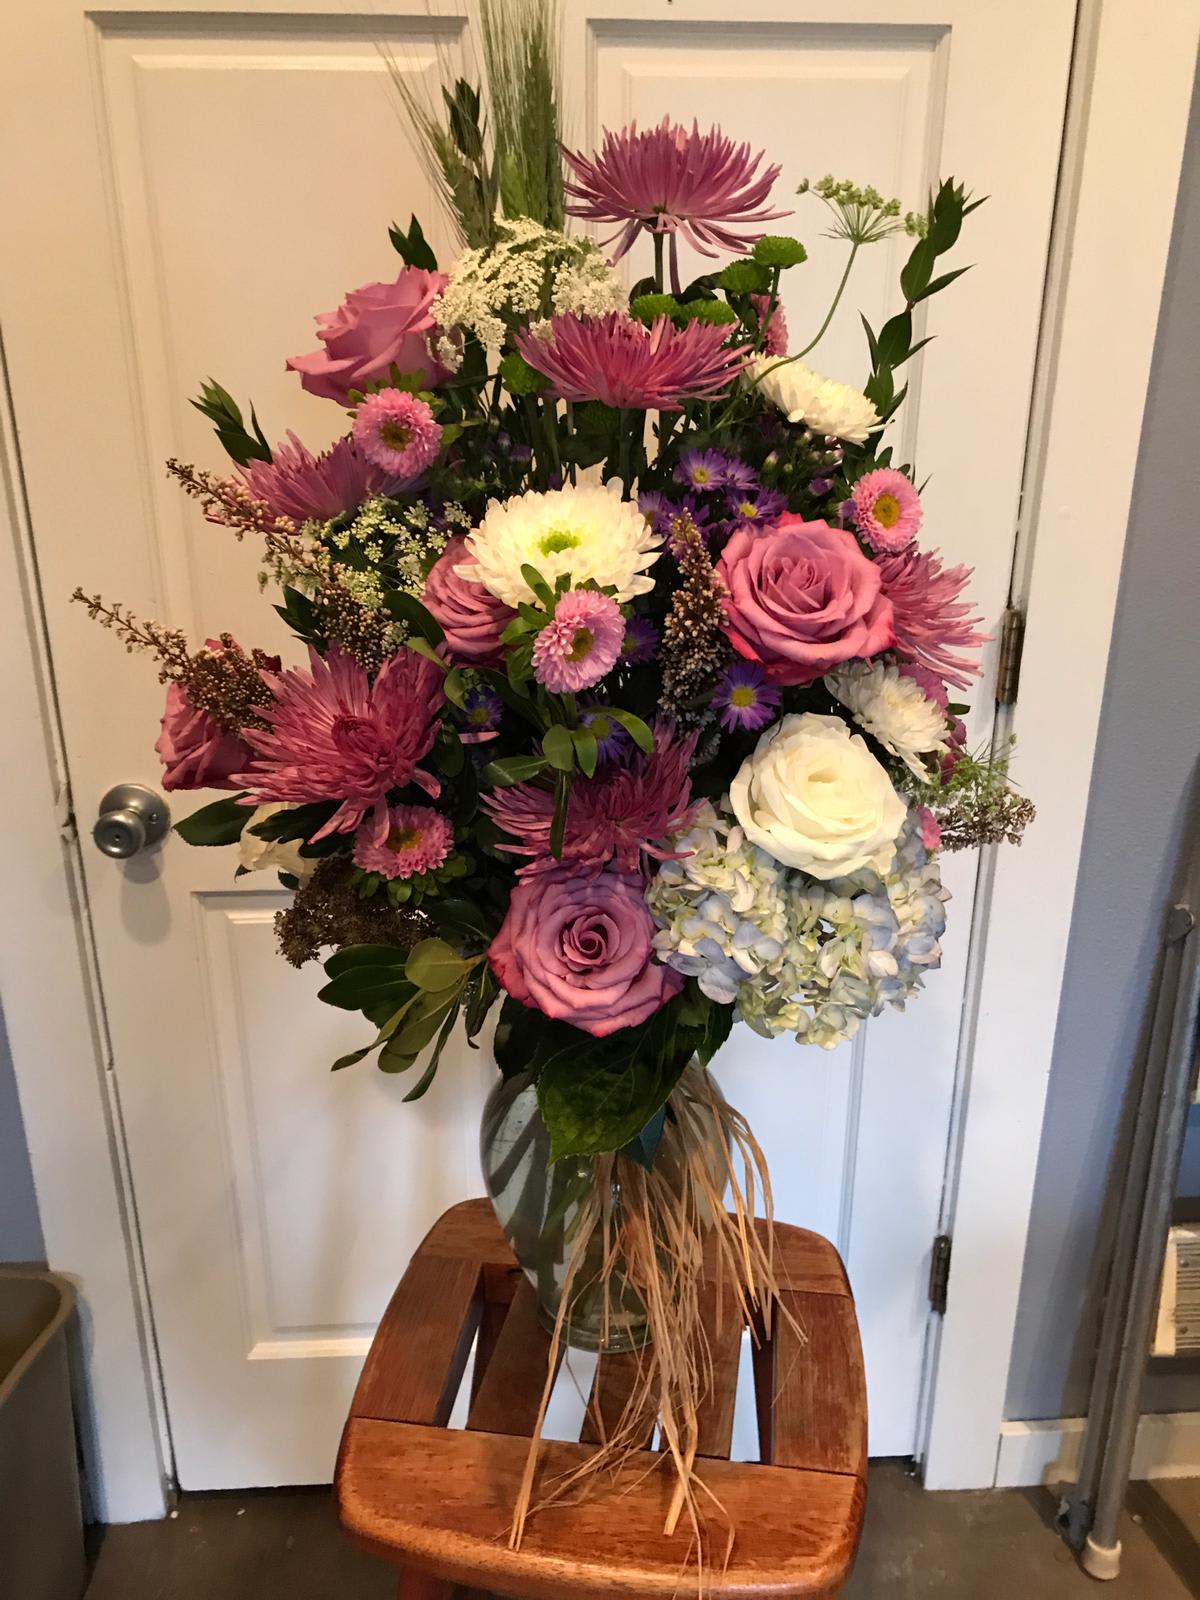 Roses Upon Roses! - This beautiful rose arrangement is over the top, if you want to send something stunning, this is your arrangement! Don’t forget you can do upgrades on it, it’s just an outstanding design!